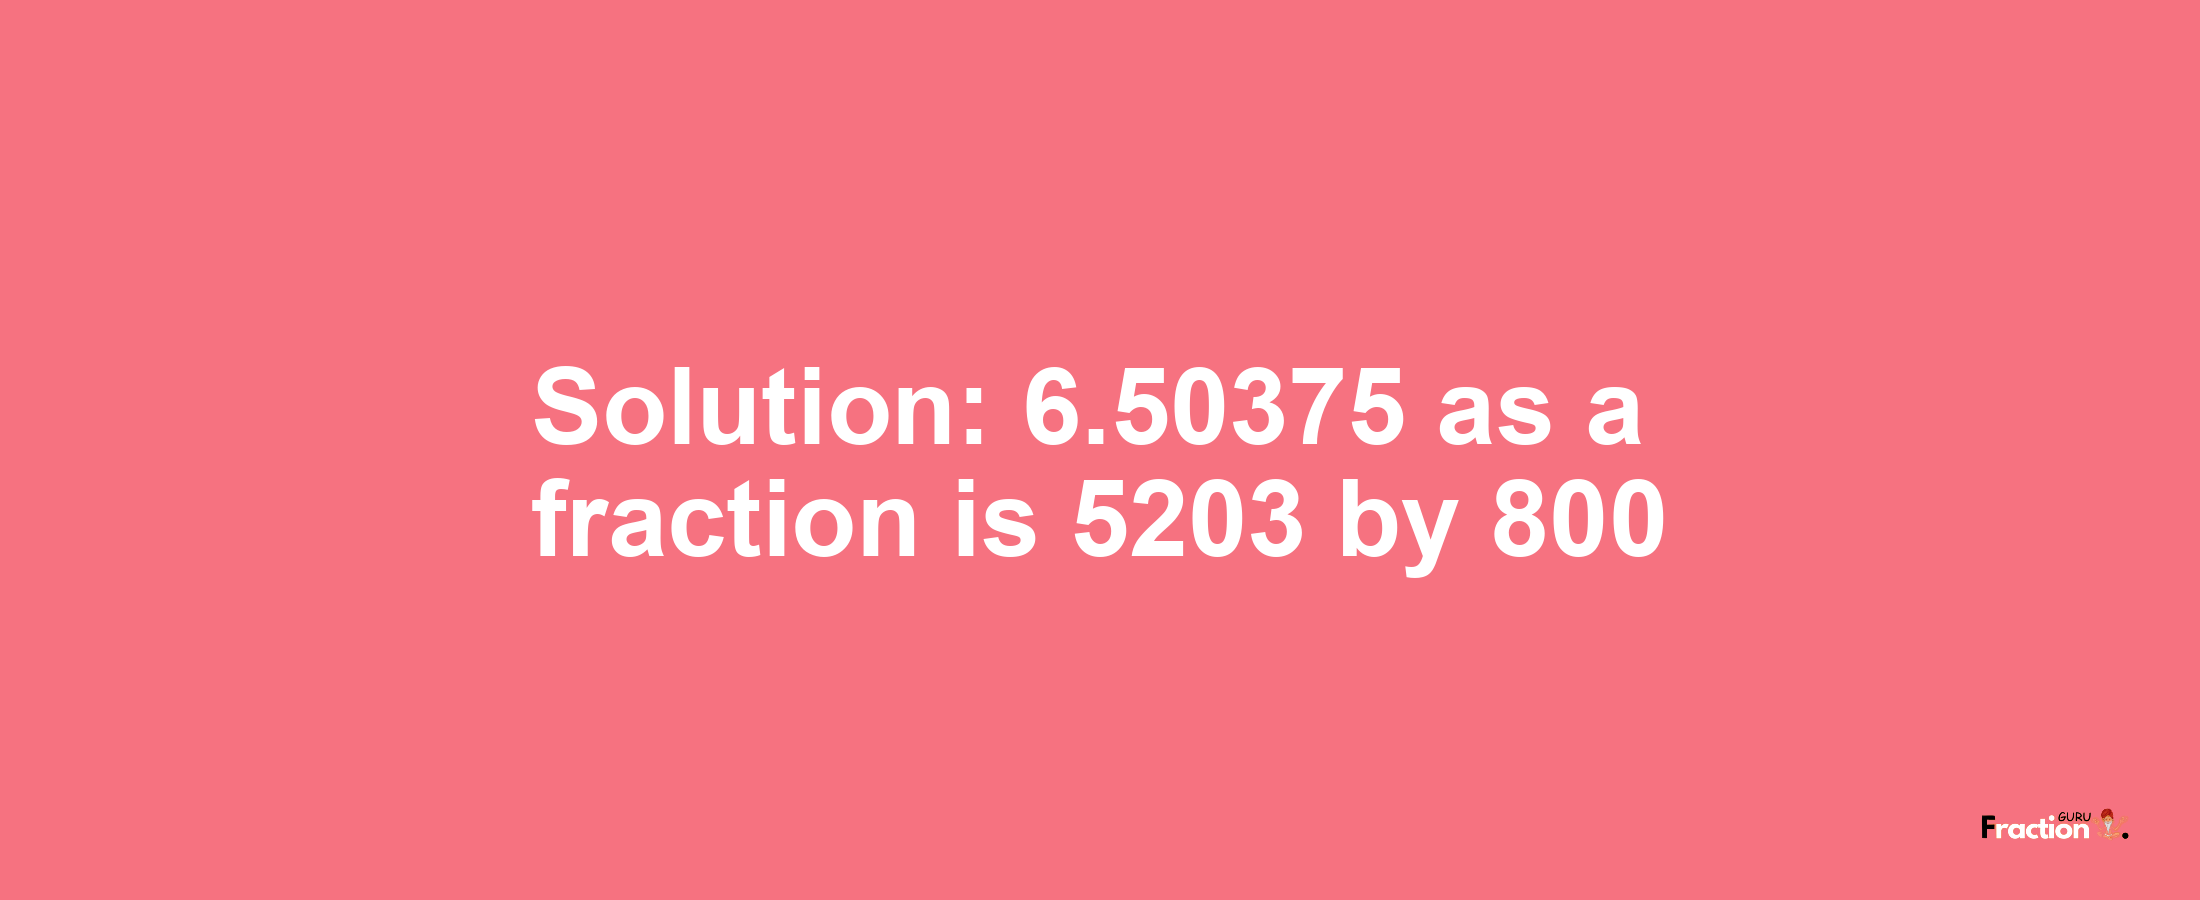 Solution:6.50375 as a fraction is 5203/800